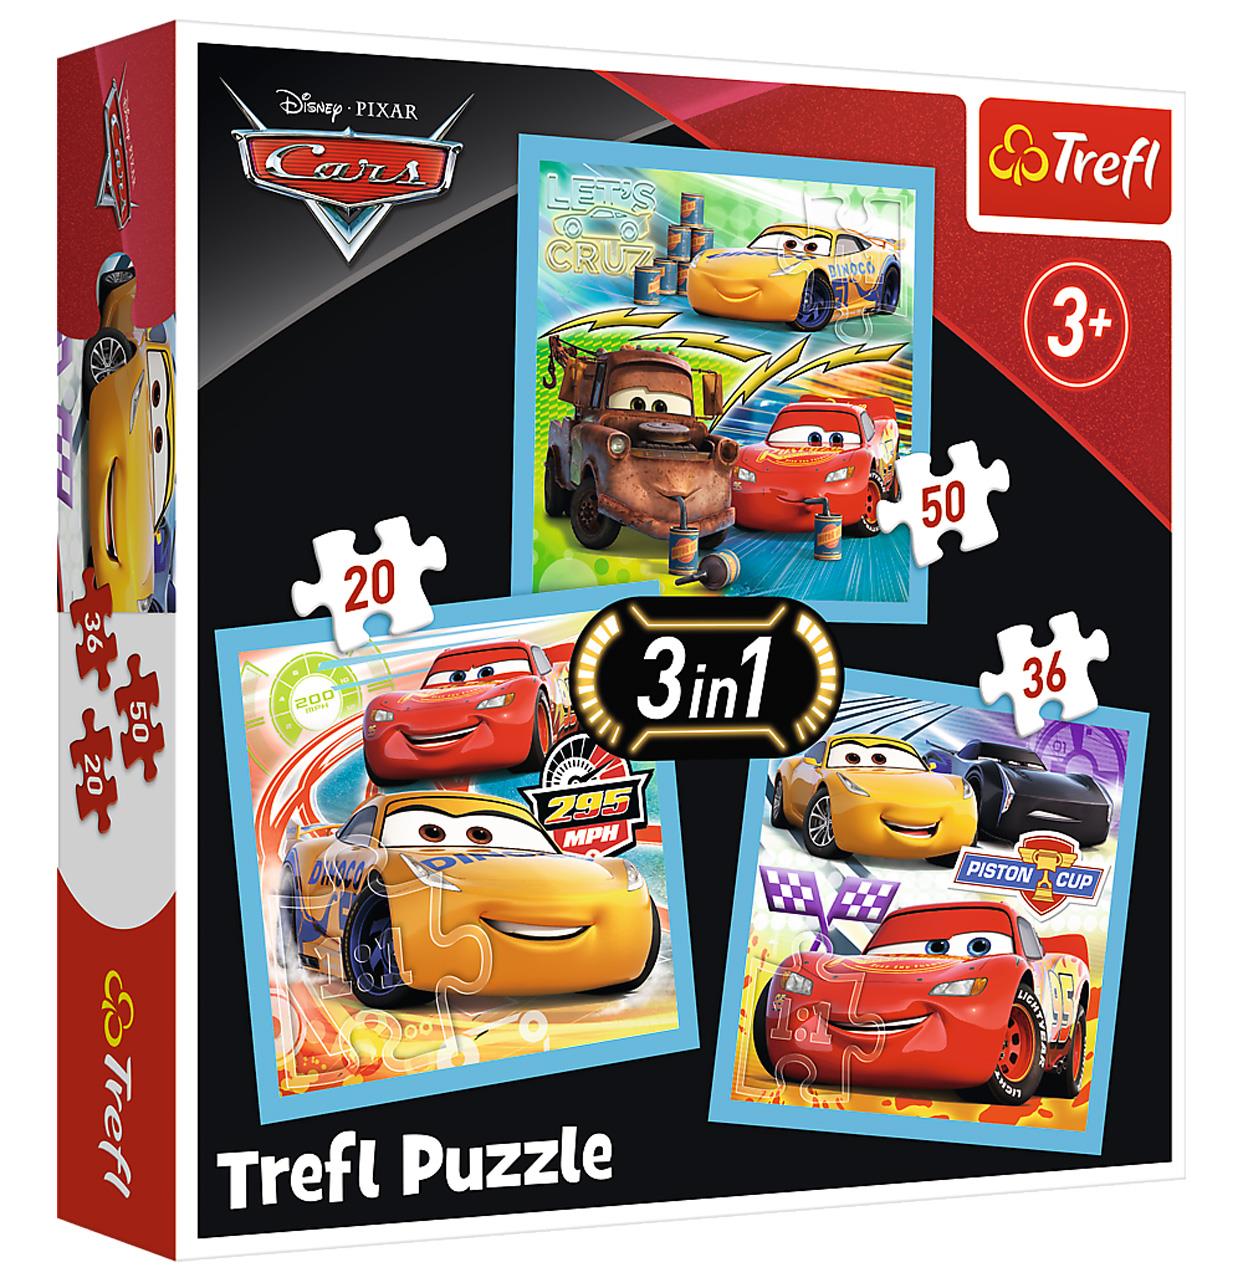 Trefl Çocuk Puzzle 34846 Mickey Mouse with Friends / Disney St 20+36+50 Parça 3 in 1 Puzzle